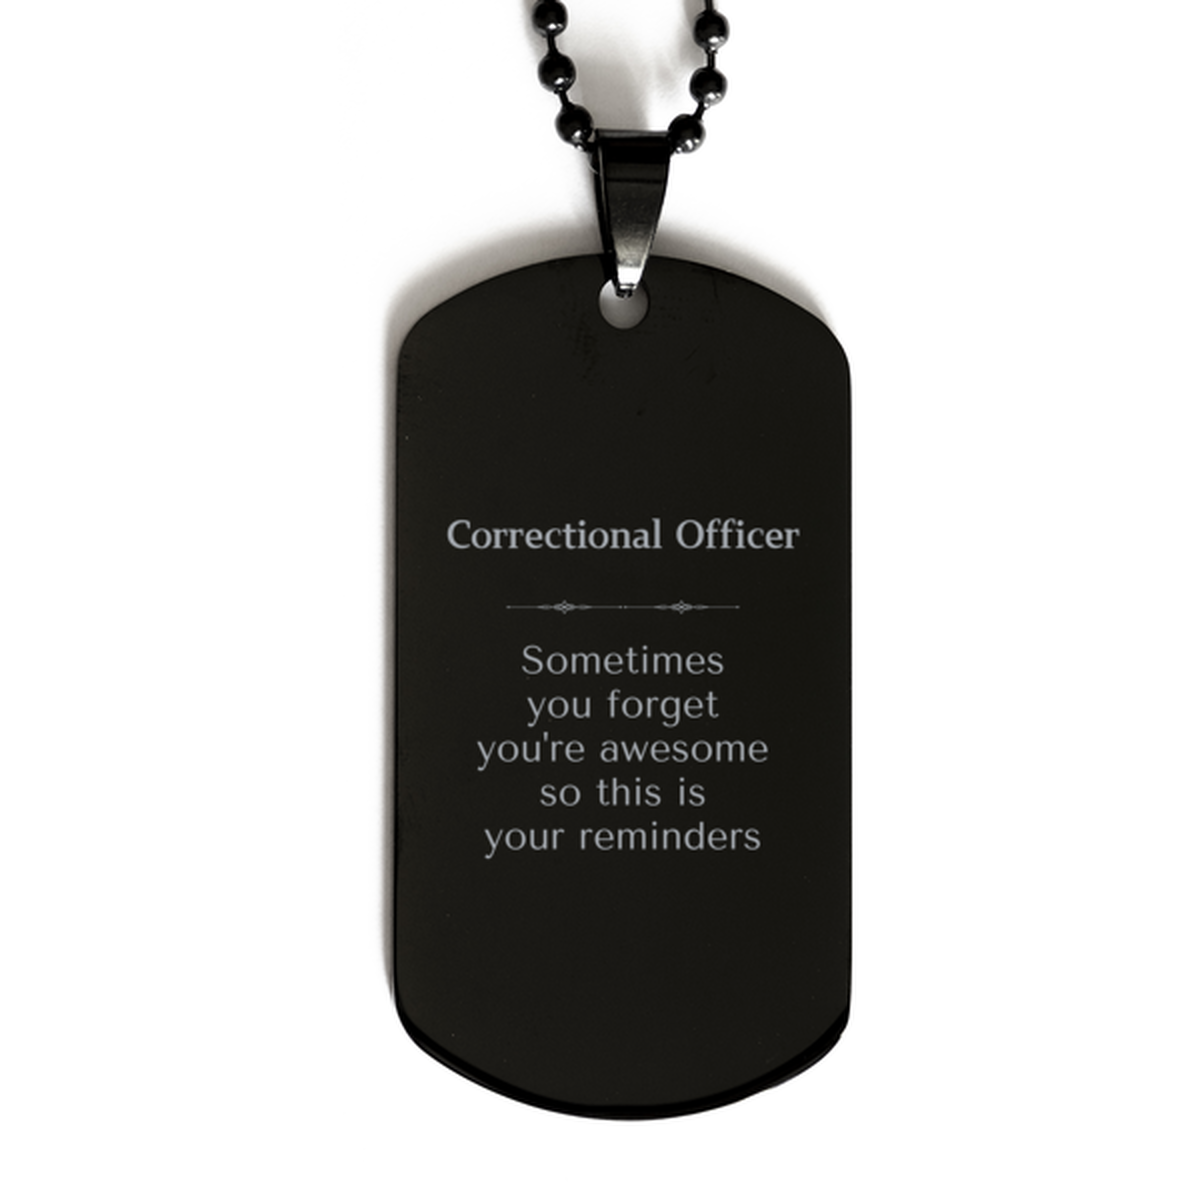 Sentimental Correctional Officer Black Dog Tag, Correctional Officer Sometimes you forget you're awesome so this is your reminders, Graduation Christmas Birthday Gifts for Correctional Officer, Men, Women, Coworkers